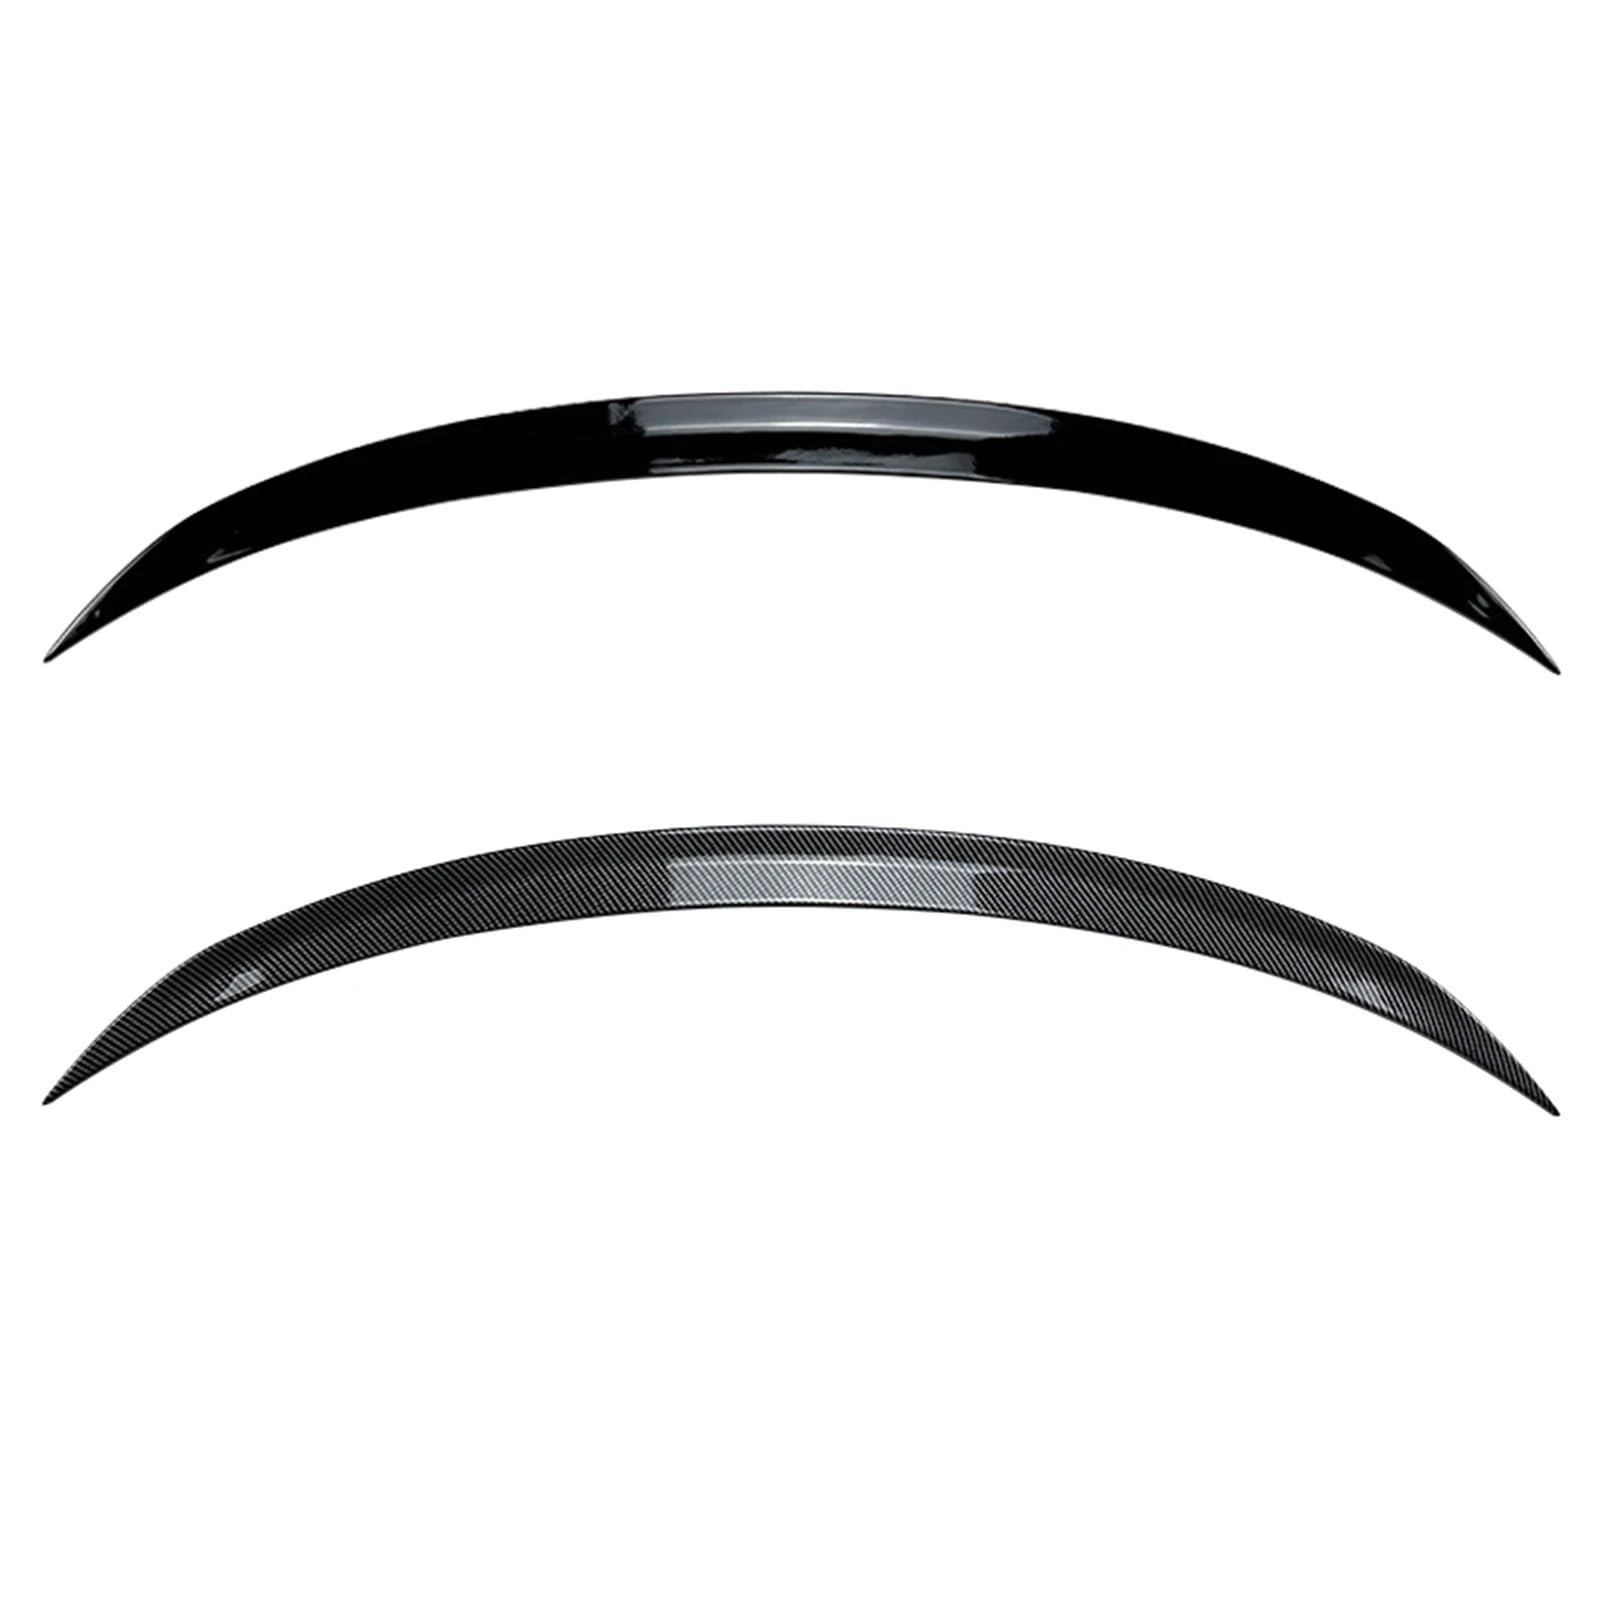 Car Rear Spoiler Wing Trunk Roof Upper Lip Decklid Flap Tail Tailgate Splitter Spoilers Wings Compatible for Benz CLA Class C118 AMG 2020 2021 2022 2023(Gloss Black) von BRANISLVV